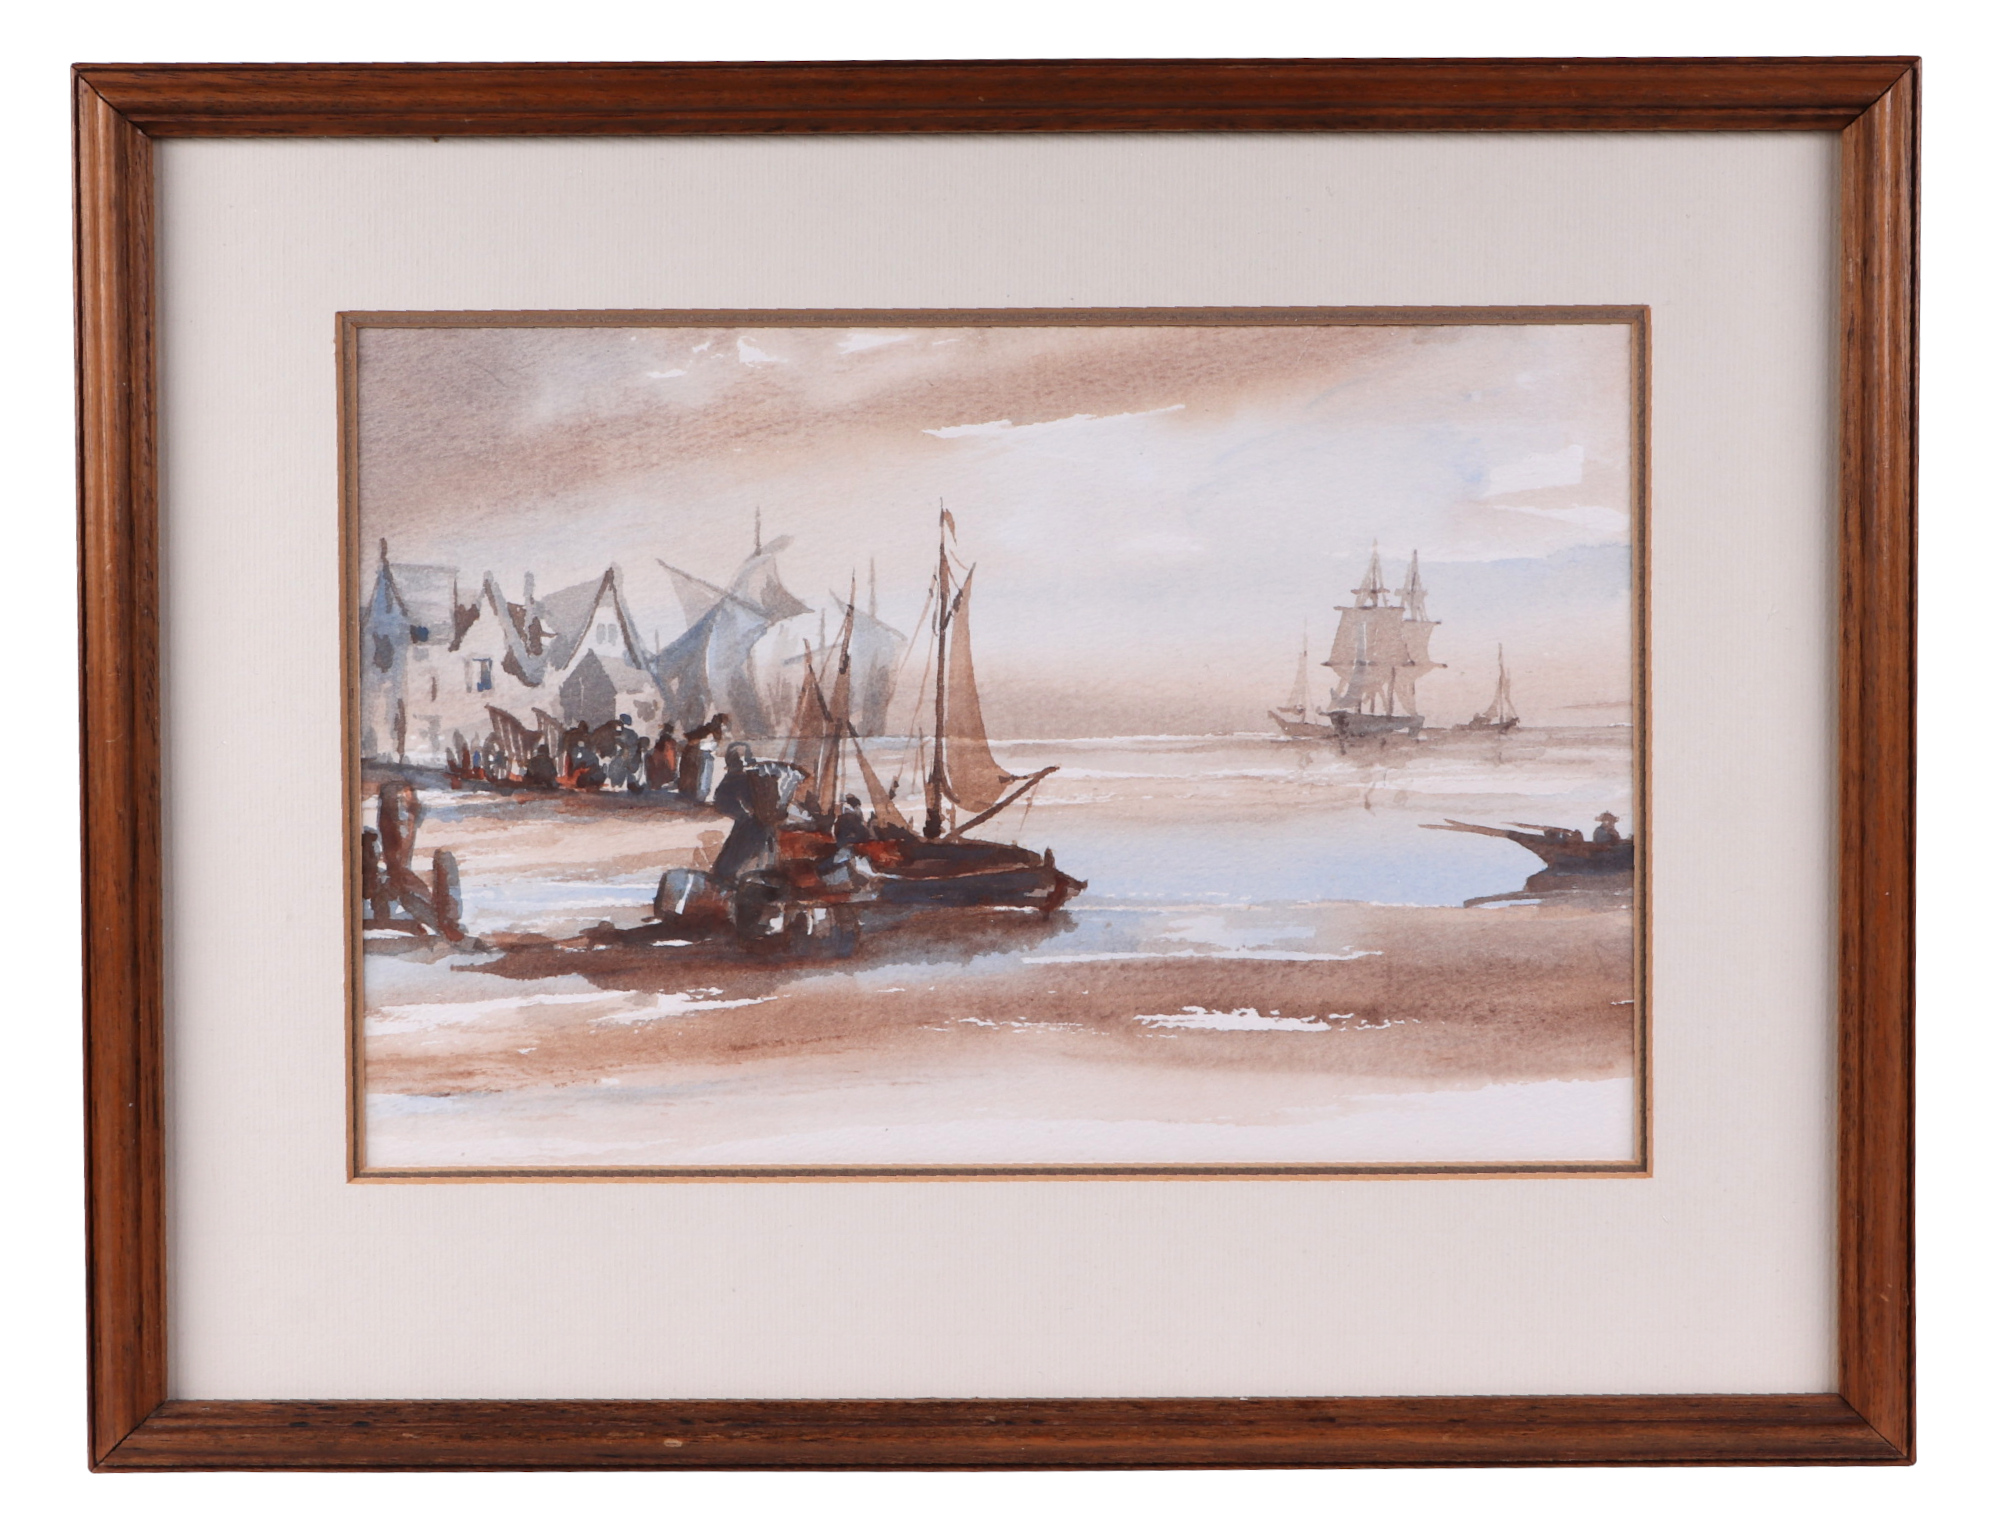 20th century English school, a coastal scene with fishing boats and tall ships, watercolour, 31 by